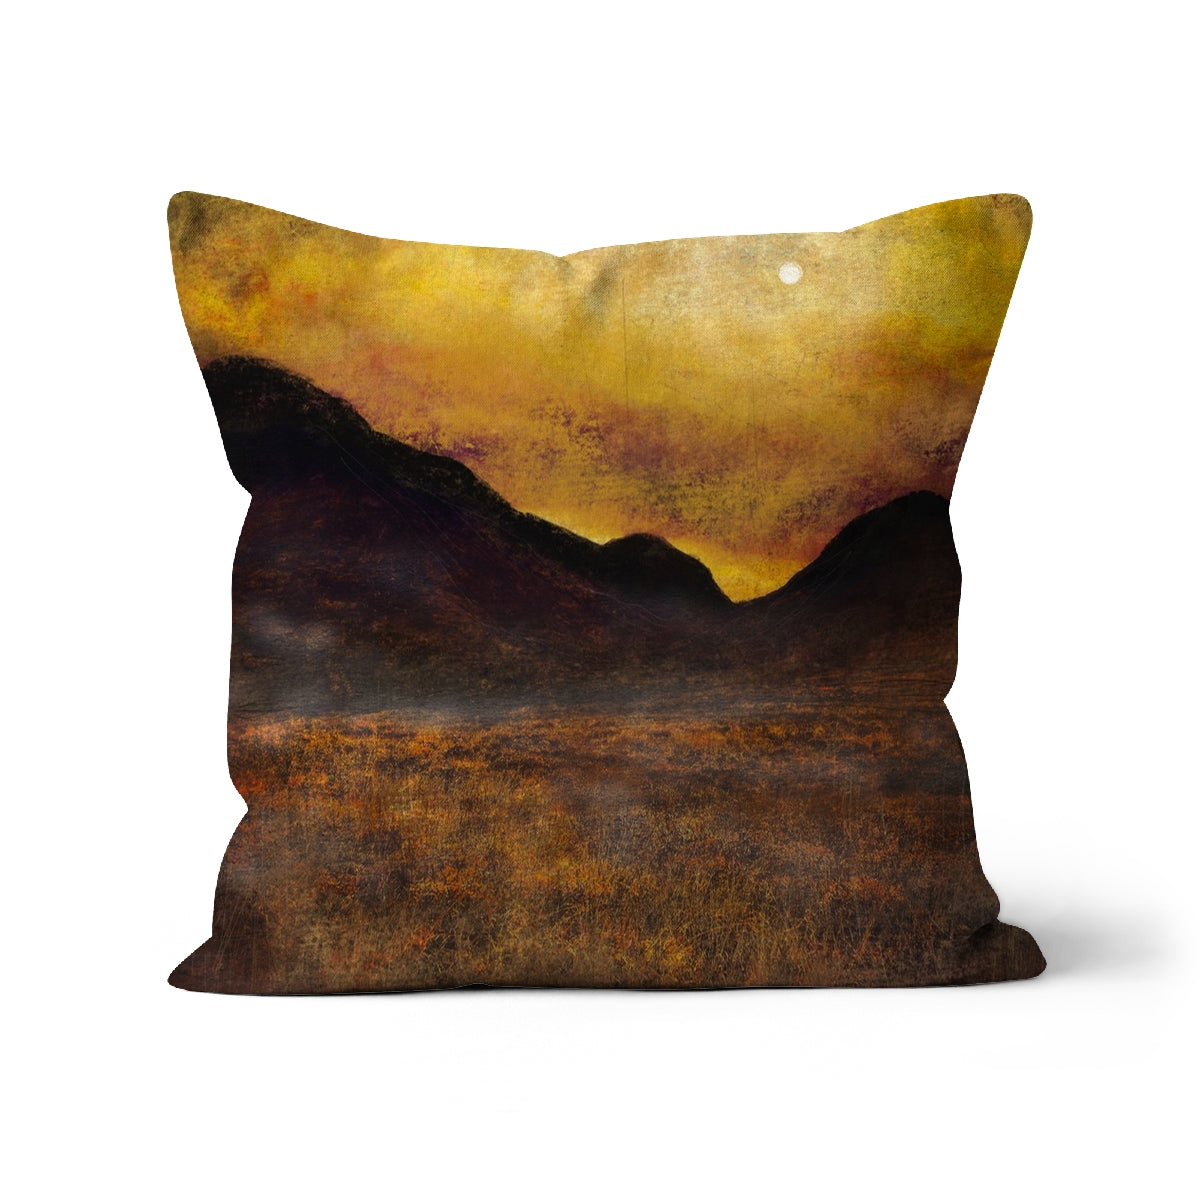 Glencoe Moonlight Art Gifts Cushion-Cushions-Glencoe Art Gallery-Faux Suede-12"x12"-Paintings, Prints, Homeware, Art Gifts From Scotland By Scottish Artist Kevin Hunter